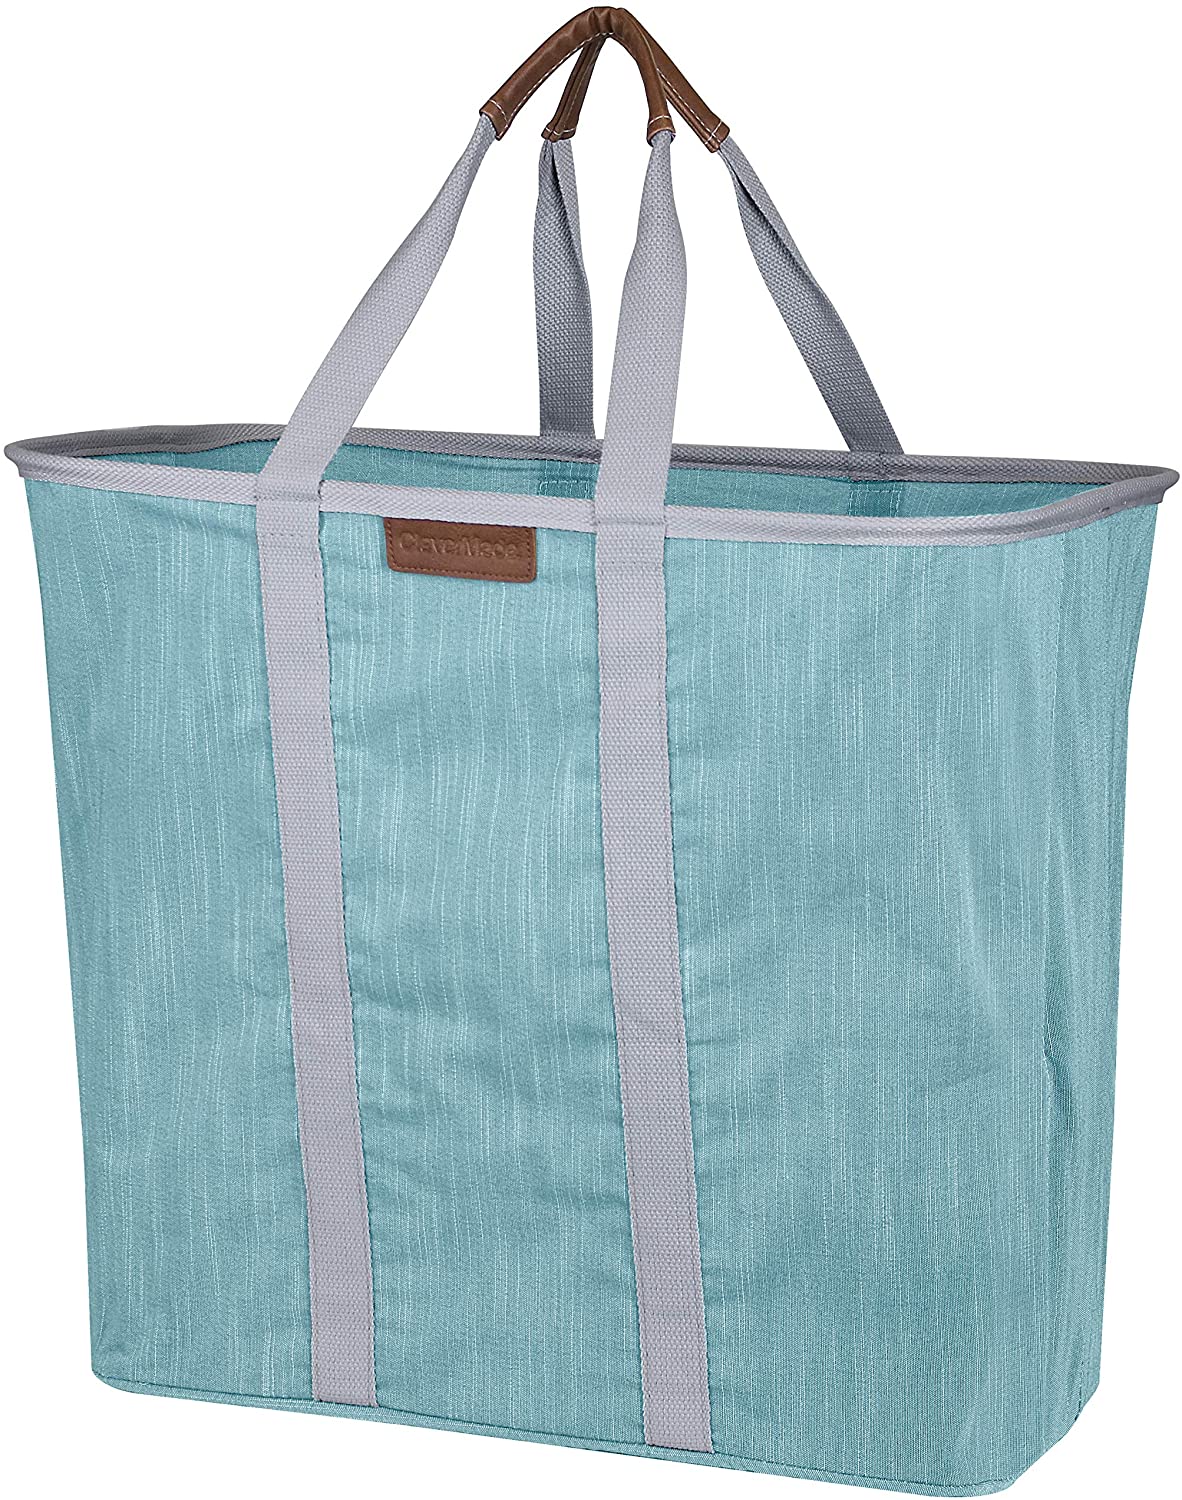 CleverMade Collapsible Fabric Laundry Basket LUXE - Foldable Pop Up Storage  Organizer - Space Saving Hamper with Carry Handles, Grey 